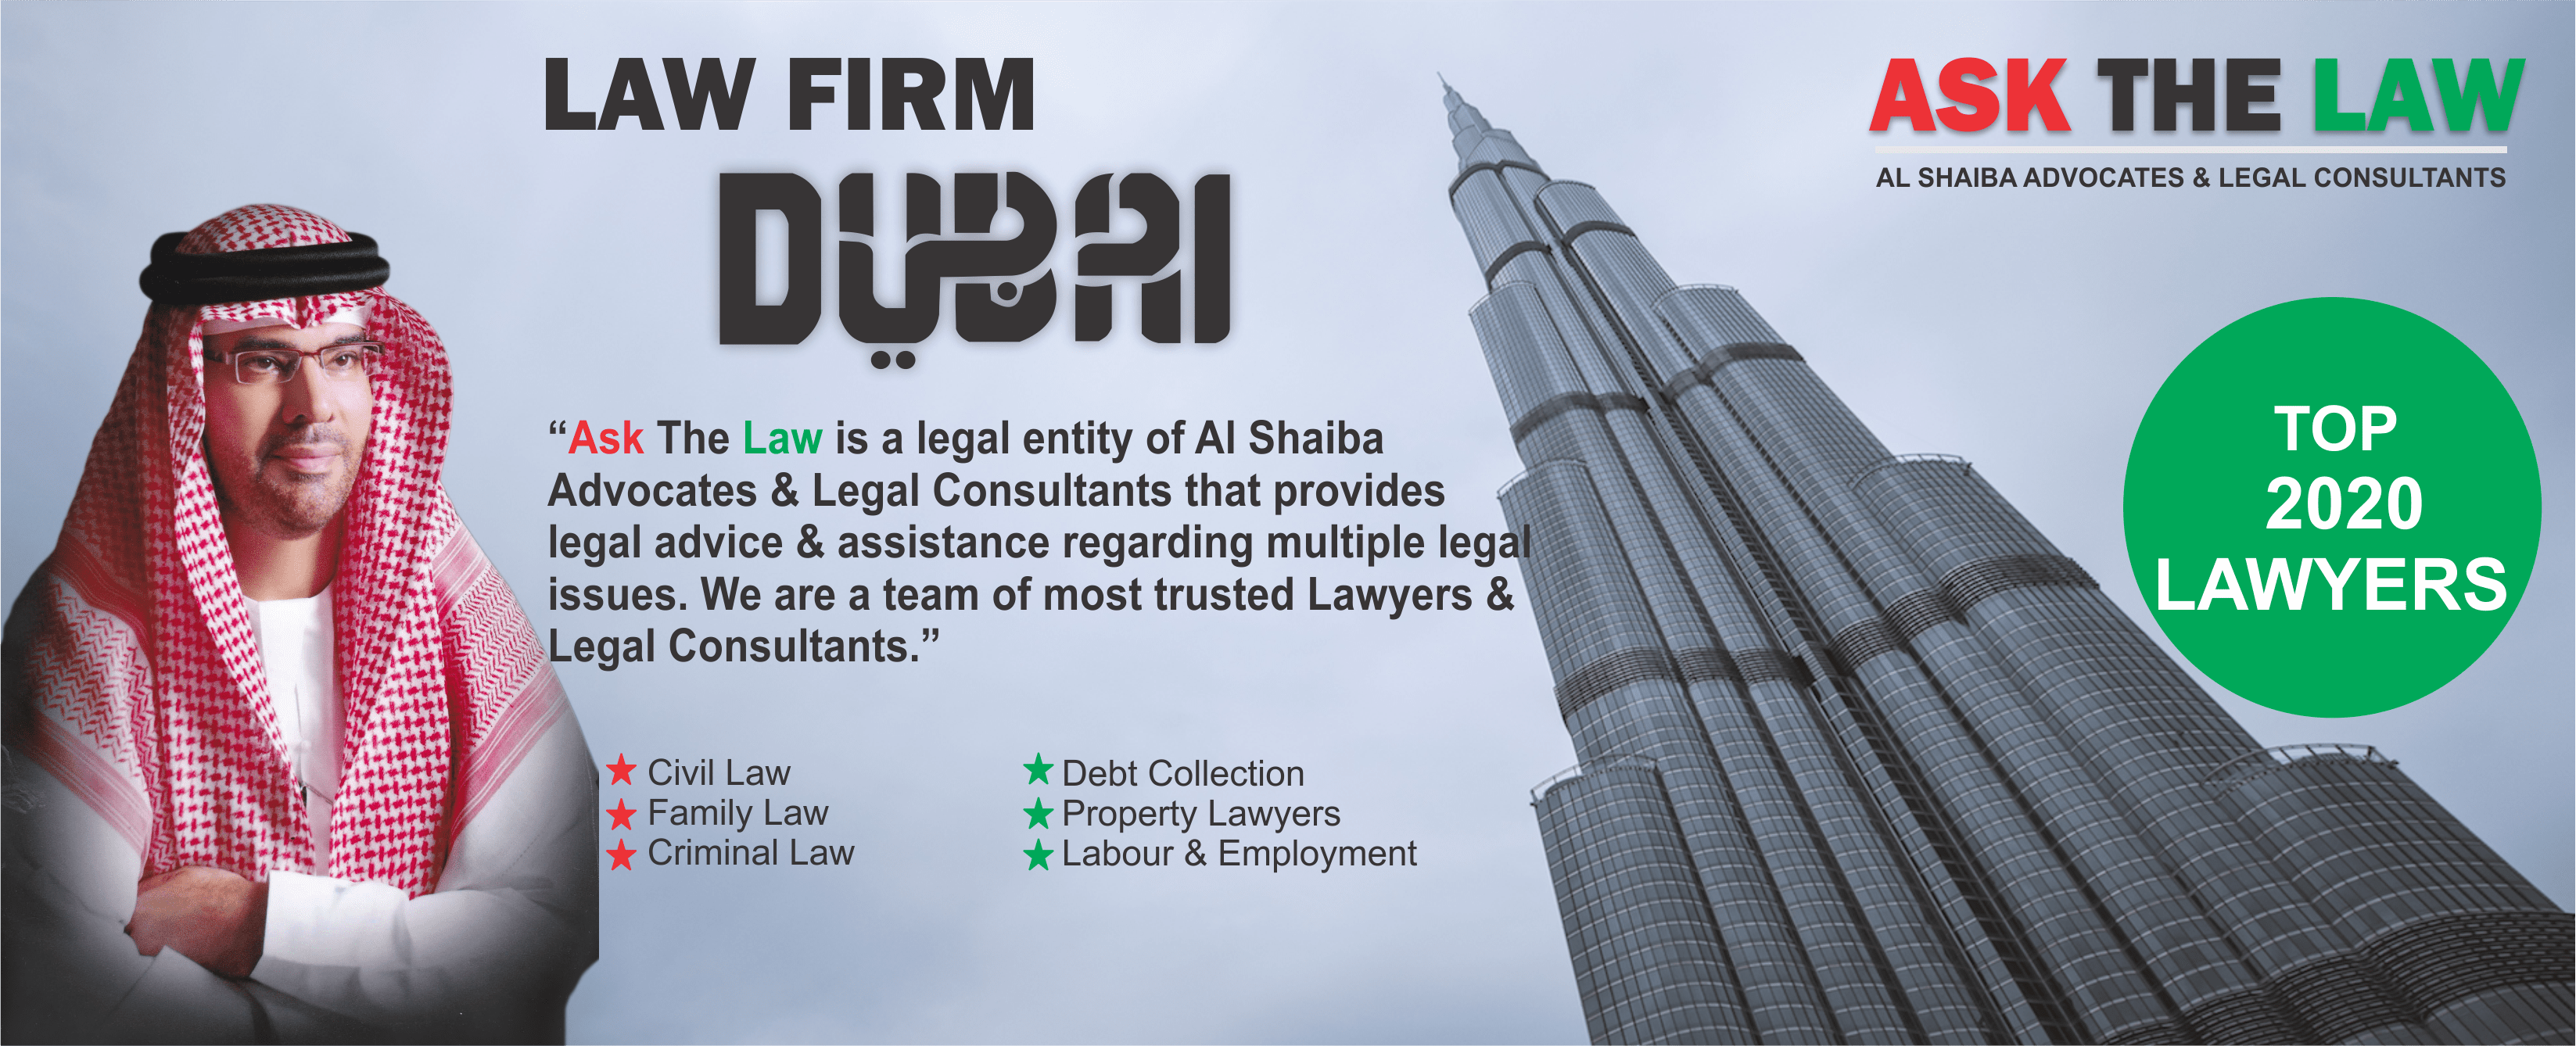 Law Firms in Dubai - ASK THE LAW cover